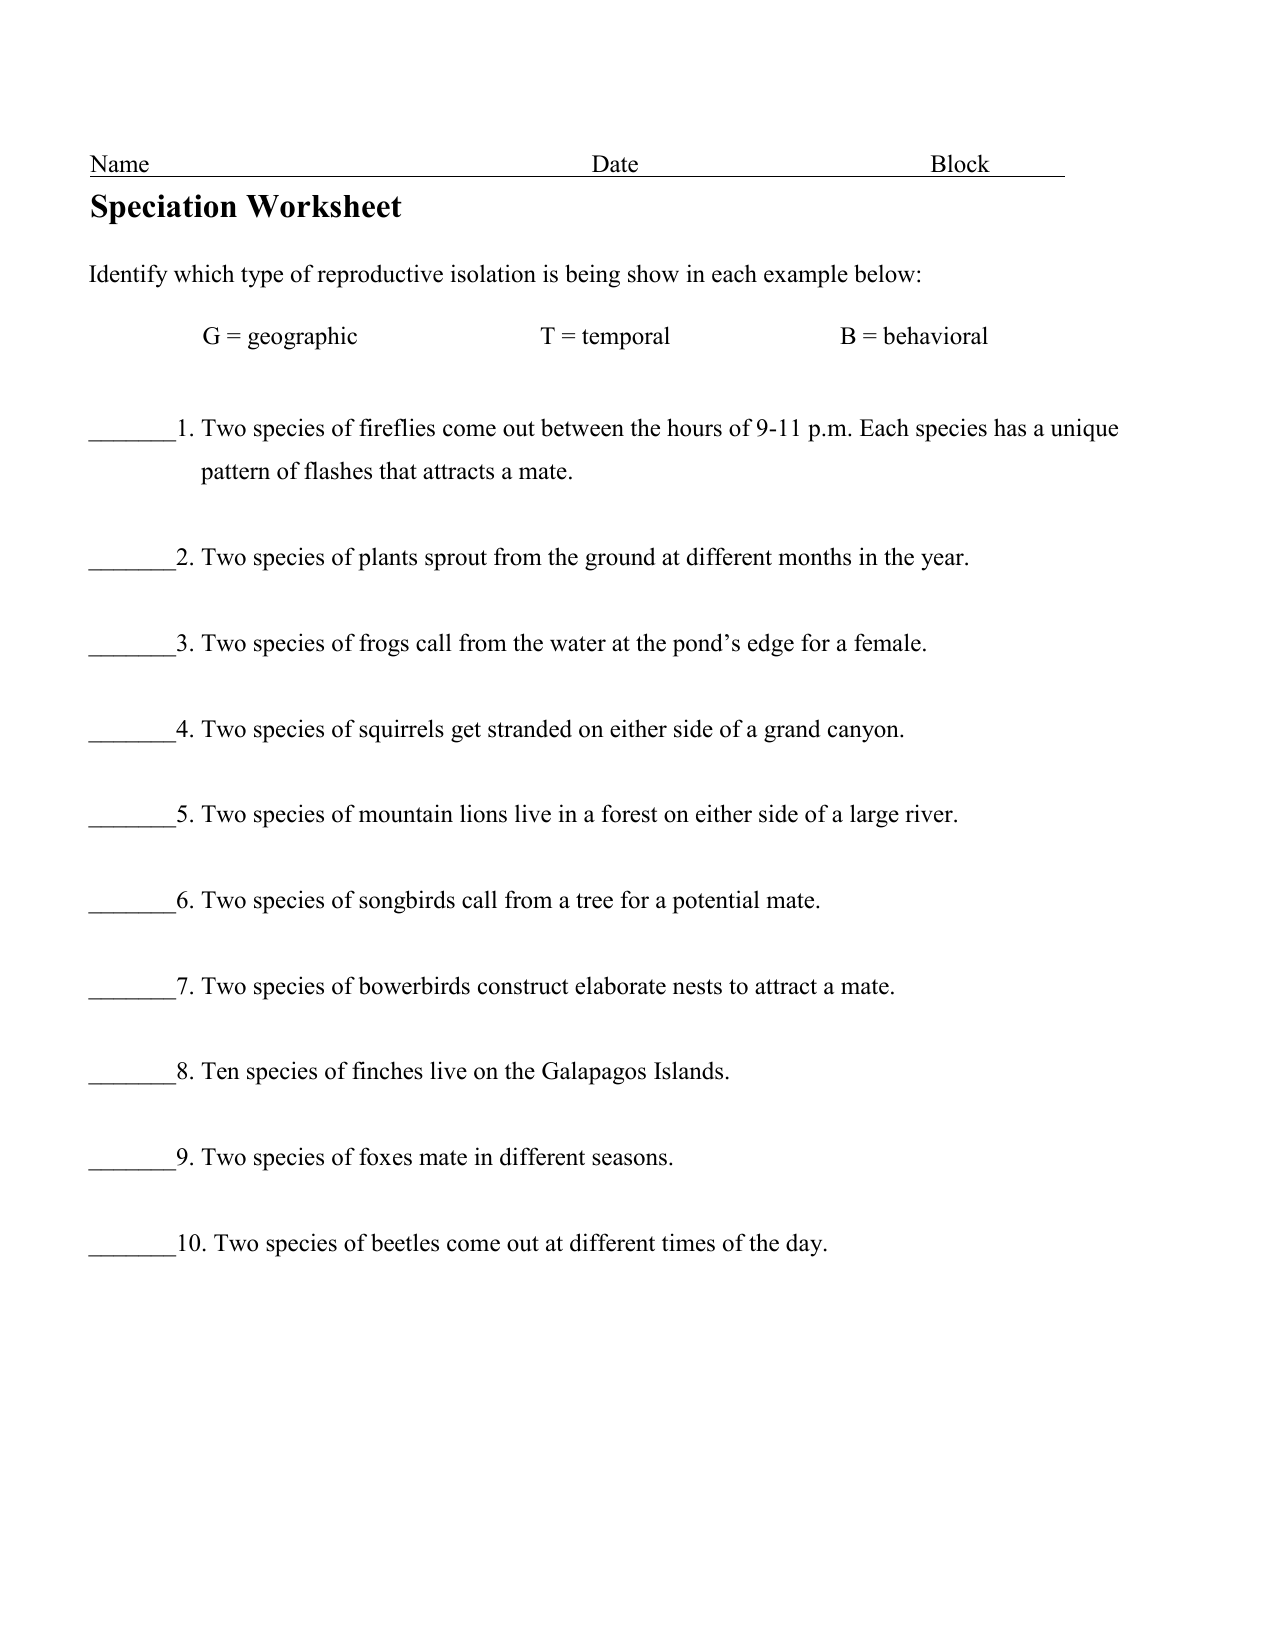 Speciation Worksheet Answers